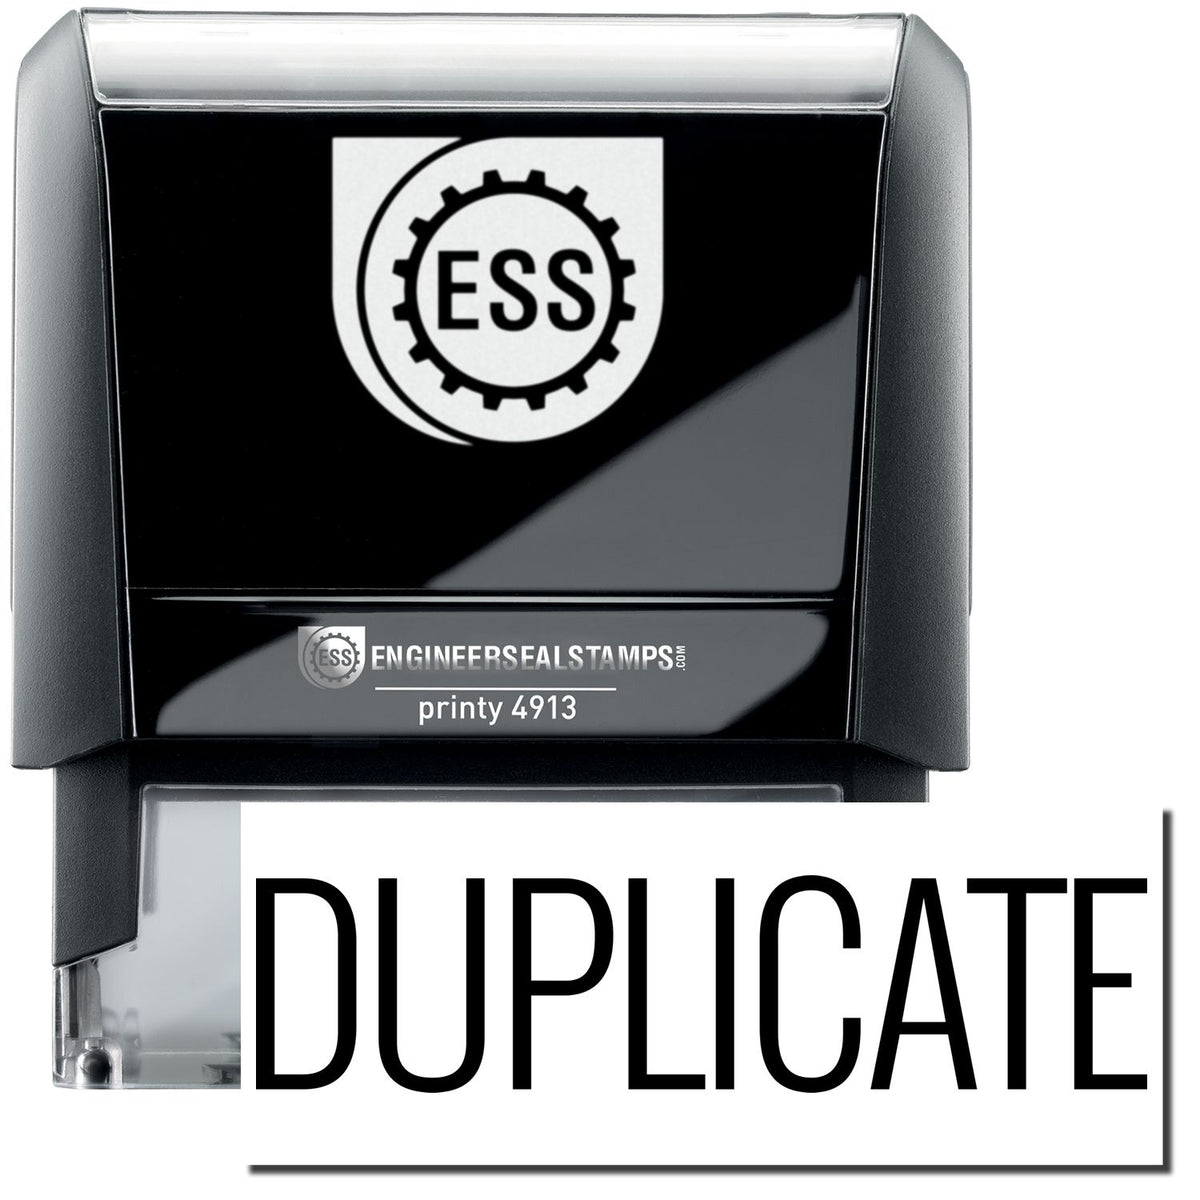 A self-inking stamp with a stamped image showing how the text &quot;DUPLICATE&quot; in a large narrow font is displayed by it after stamping.